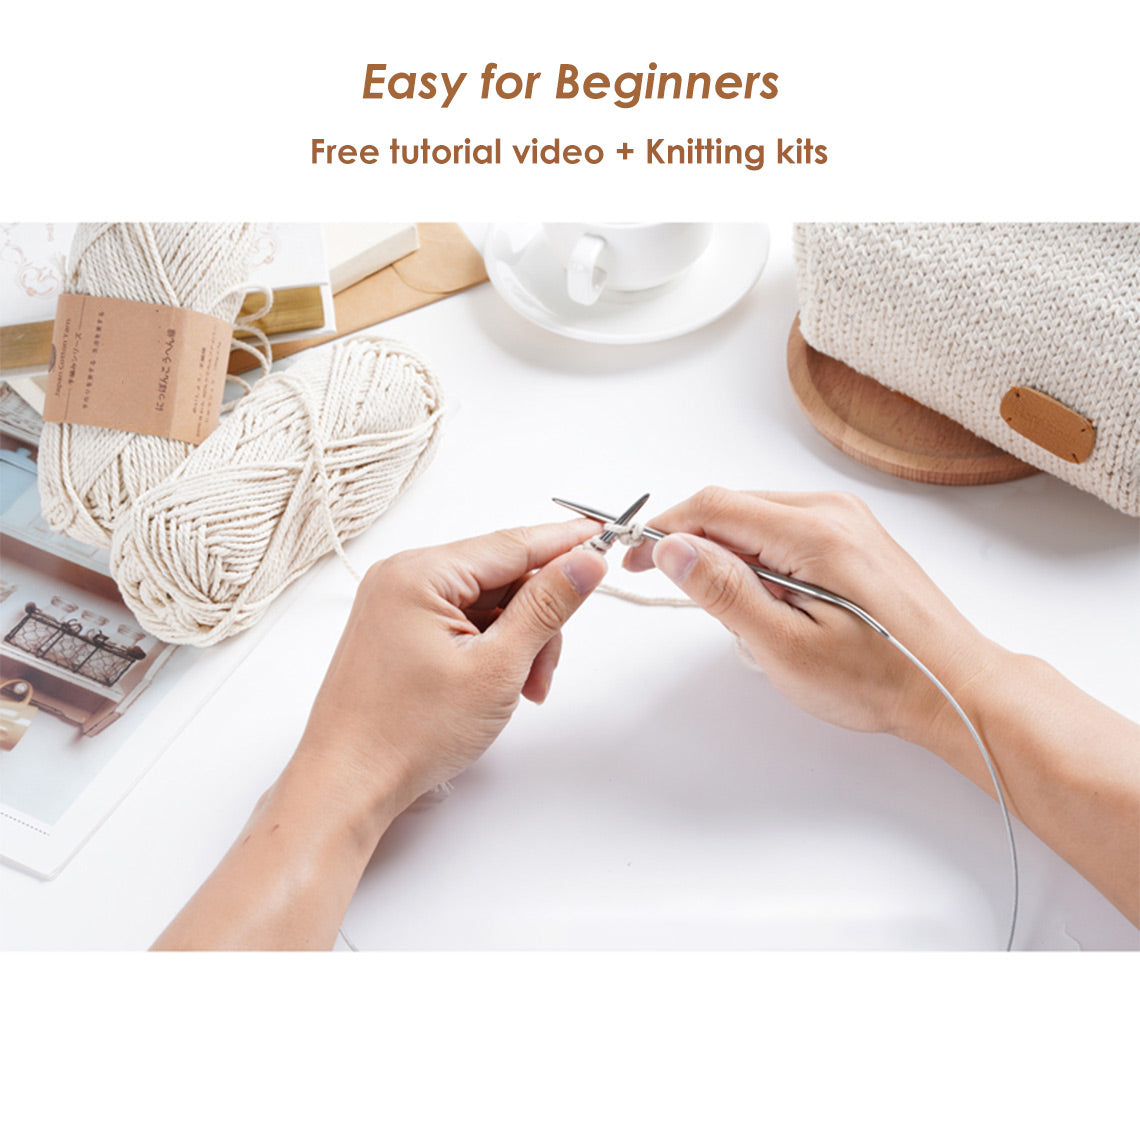 Knitting Kit Easy Project for Beginners, Kids, Adults | All Knitting Supplies Includes: Yarn, Needles, and Video Instruction - POPSEWING™